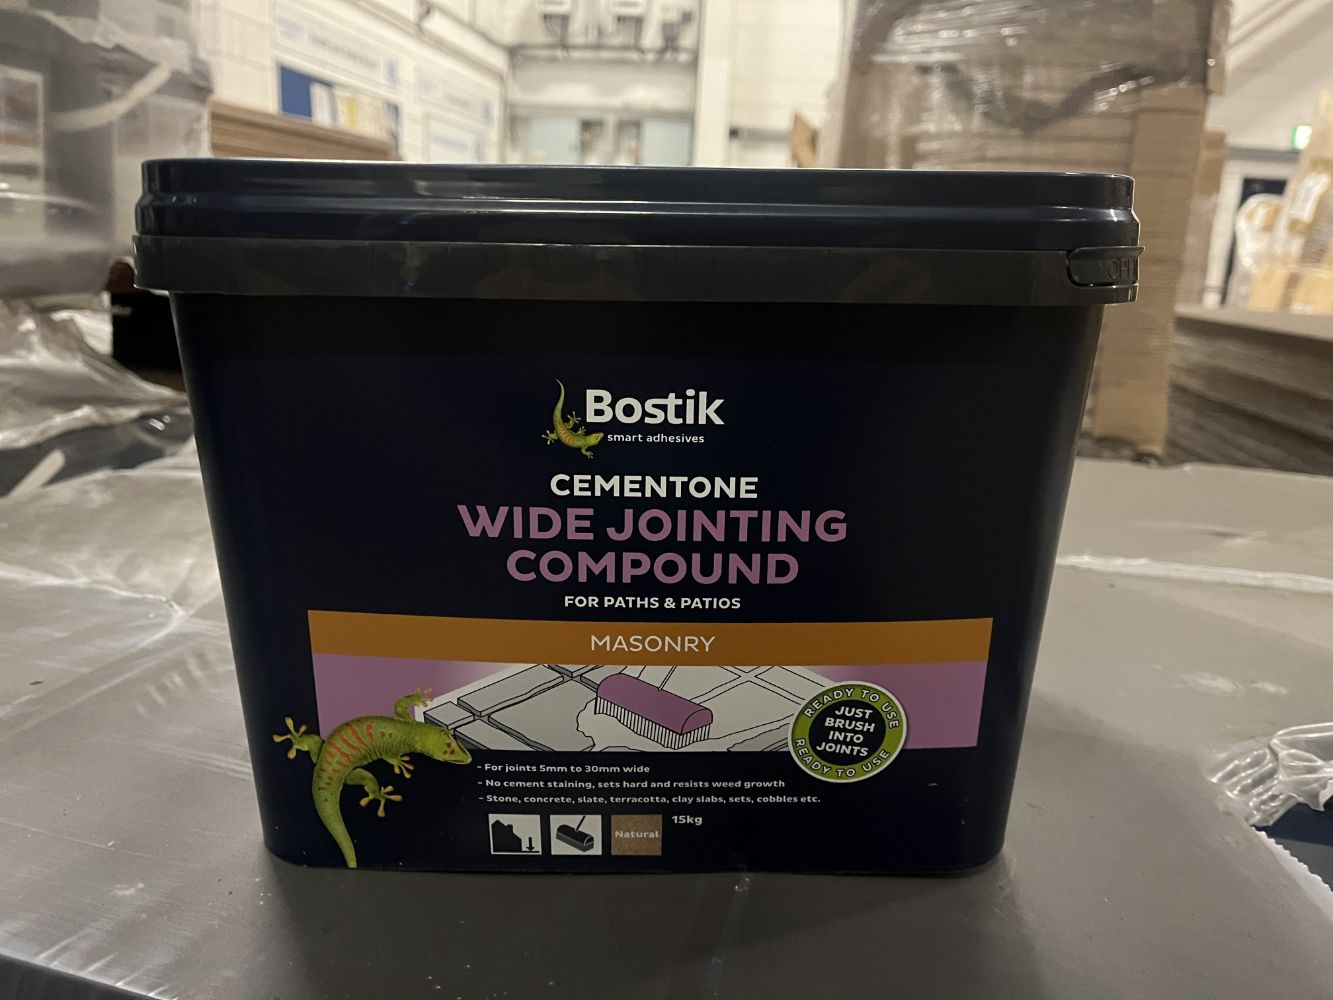 PALLETS & TRUCK LOADS OF BOSTIK 15KG CEMETONE WIDE JOINTING COMPOUND FOR PATHS AND PATIOS - DELIVERY AVAILABLE